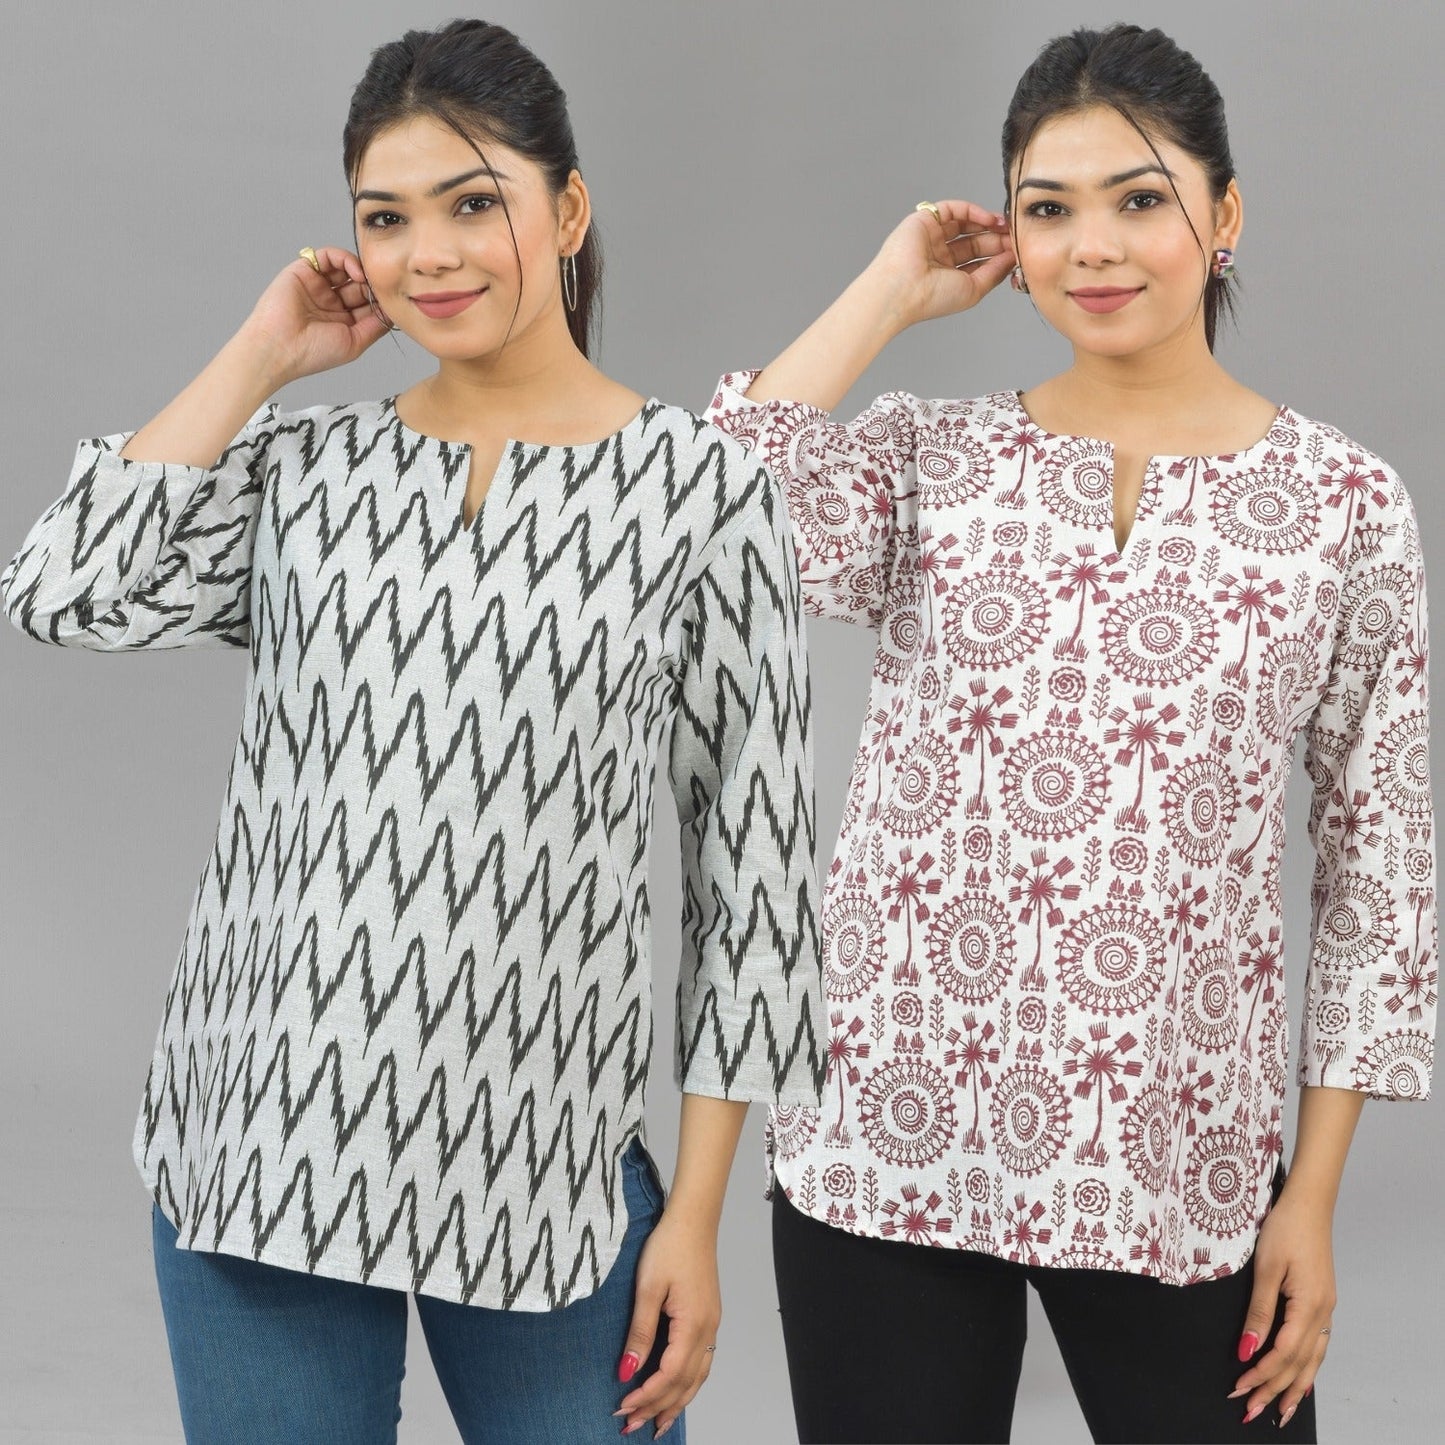 Pack Of 2 Womens Regular Fit Black Zig Zag And Maroon Tribal Printed Tops Combo